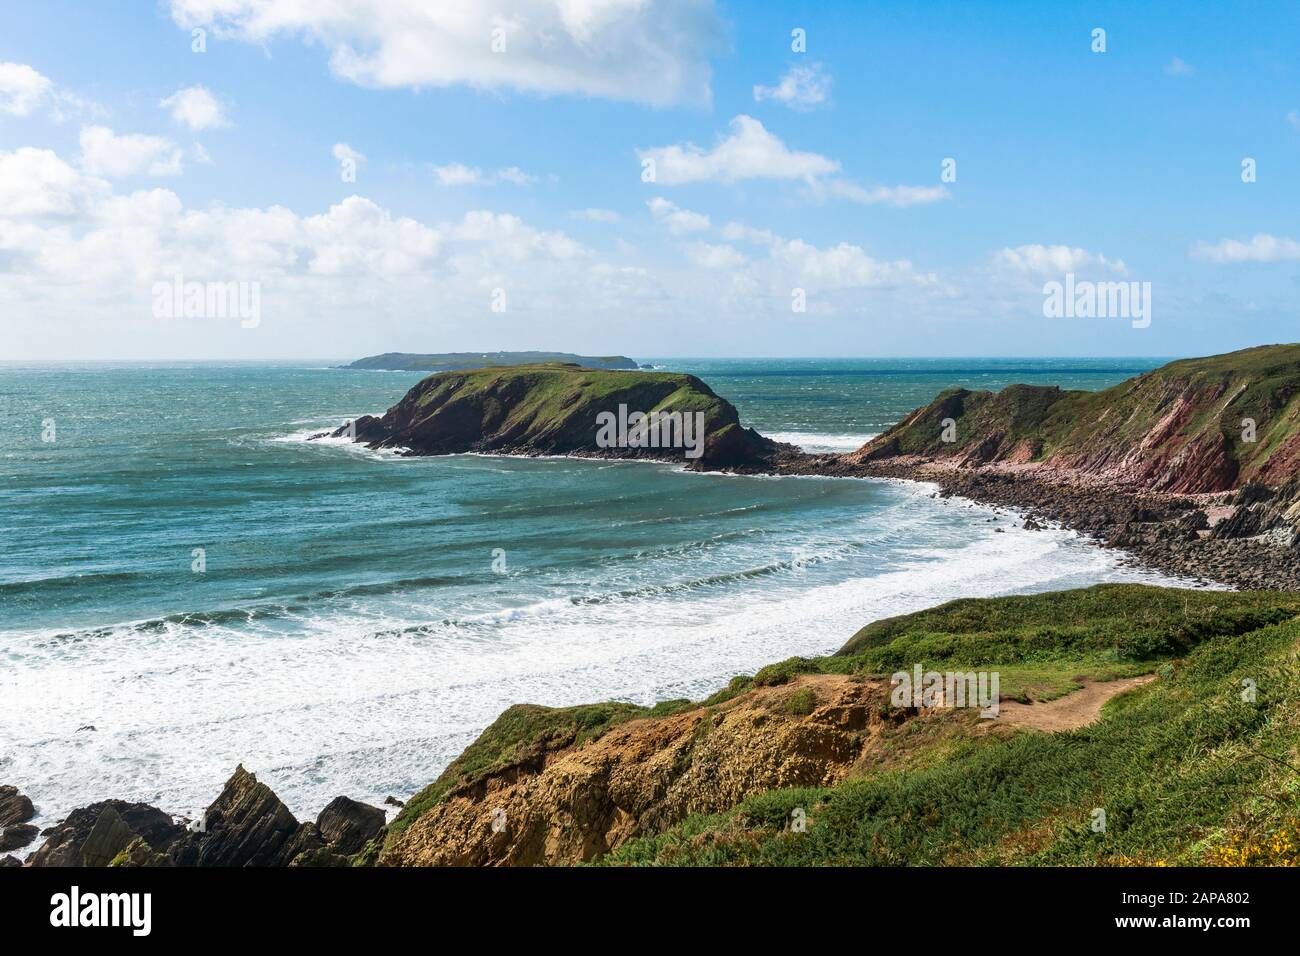 Gateholm Island with Skokholm Island in the distance,South Pembrokeshire, Wales. Stock Photo